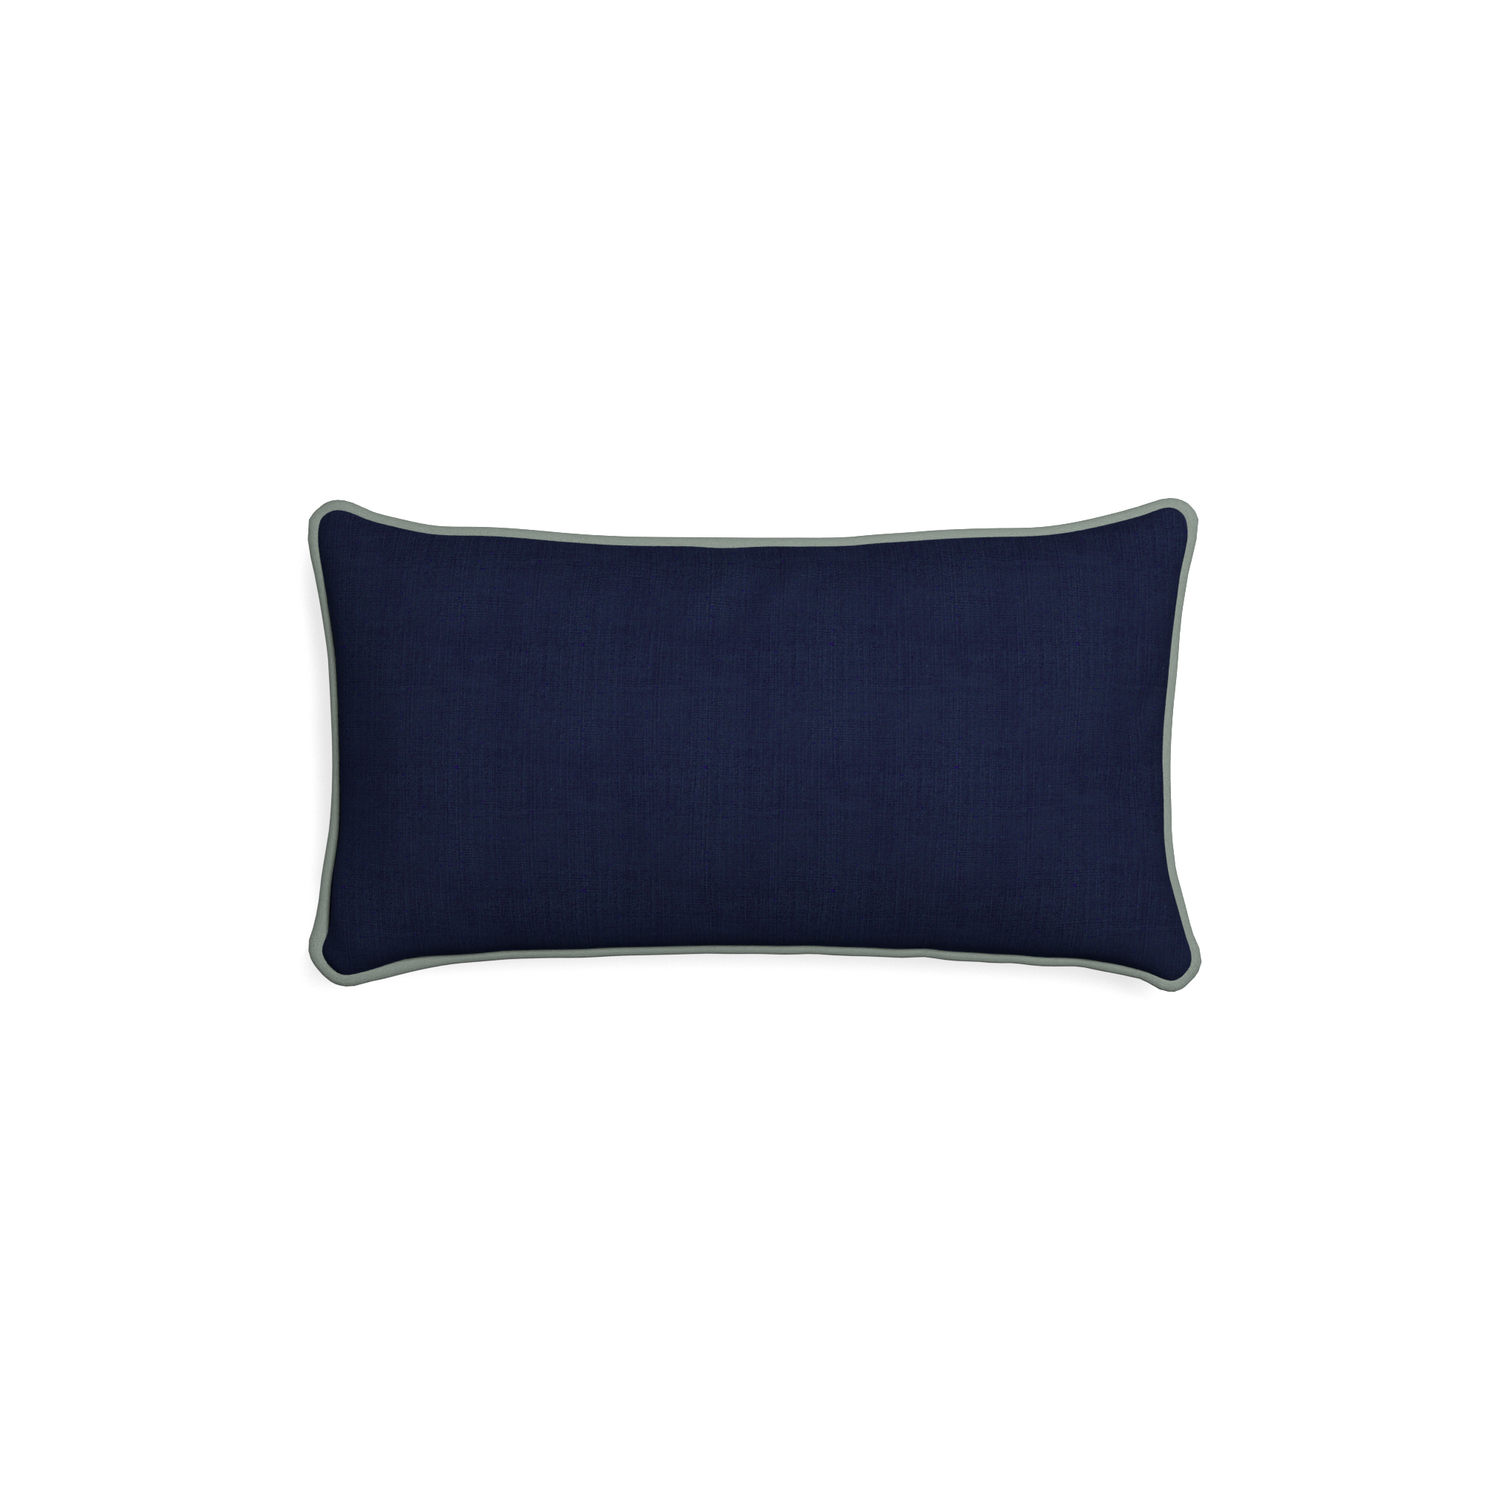 Petite-lumbar midnight custom navy bluepillow with sage piping on white background